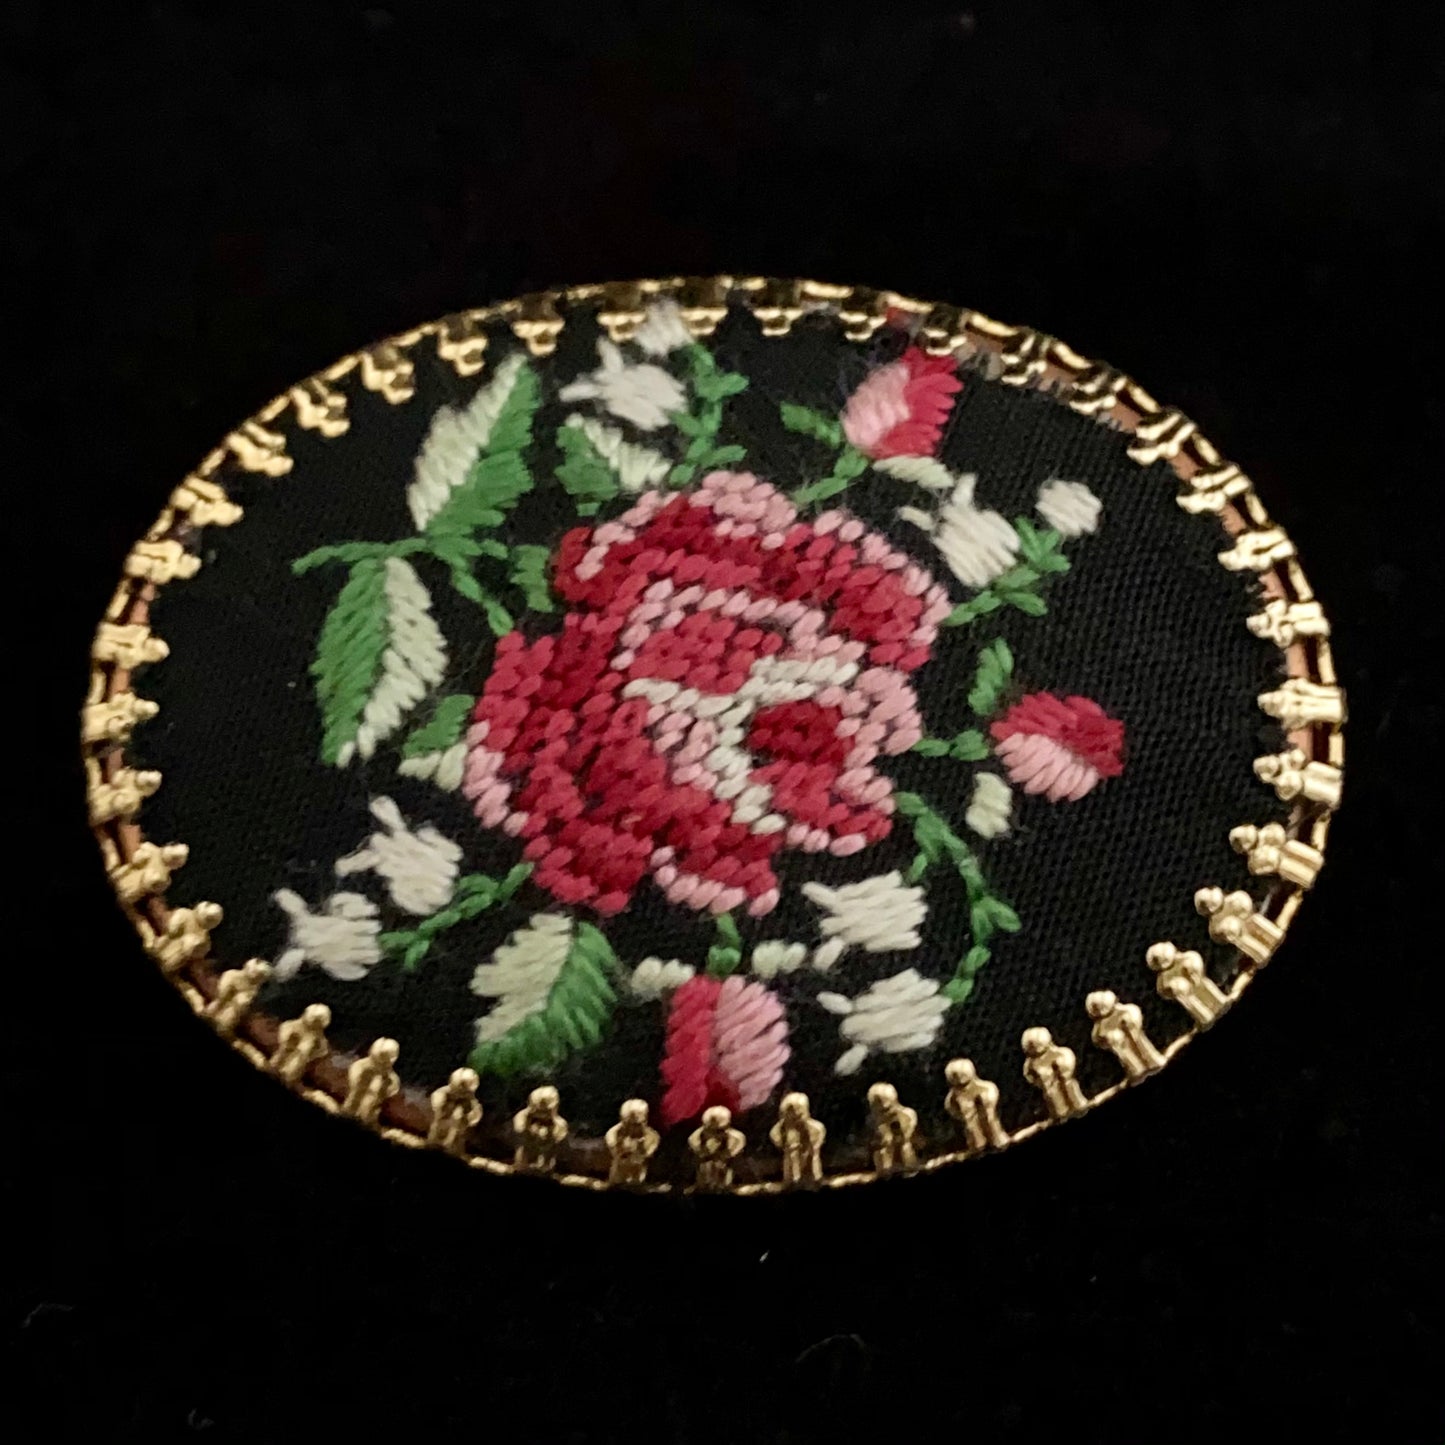 Late 70s/ Early 80s Petit Point Embroidered Brooch